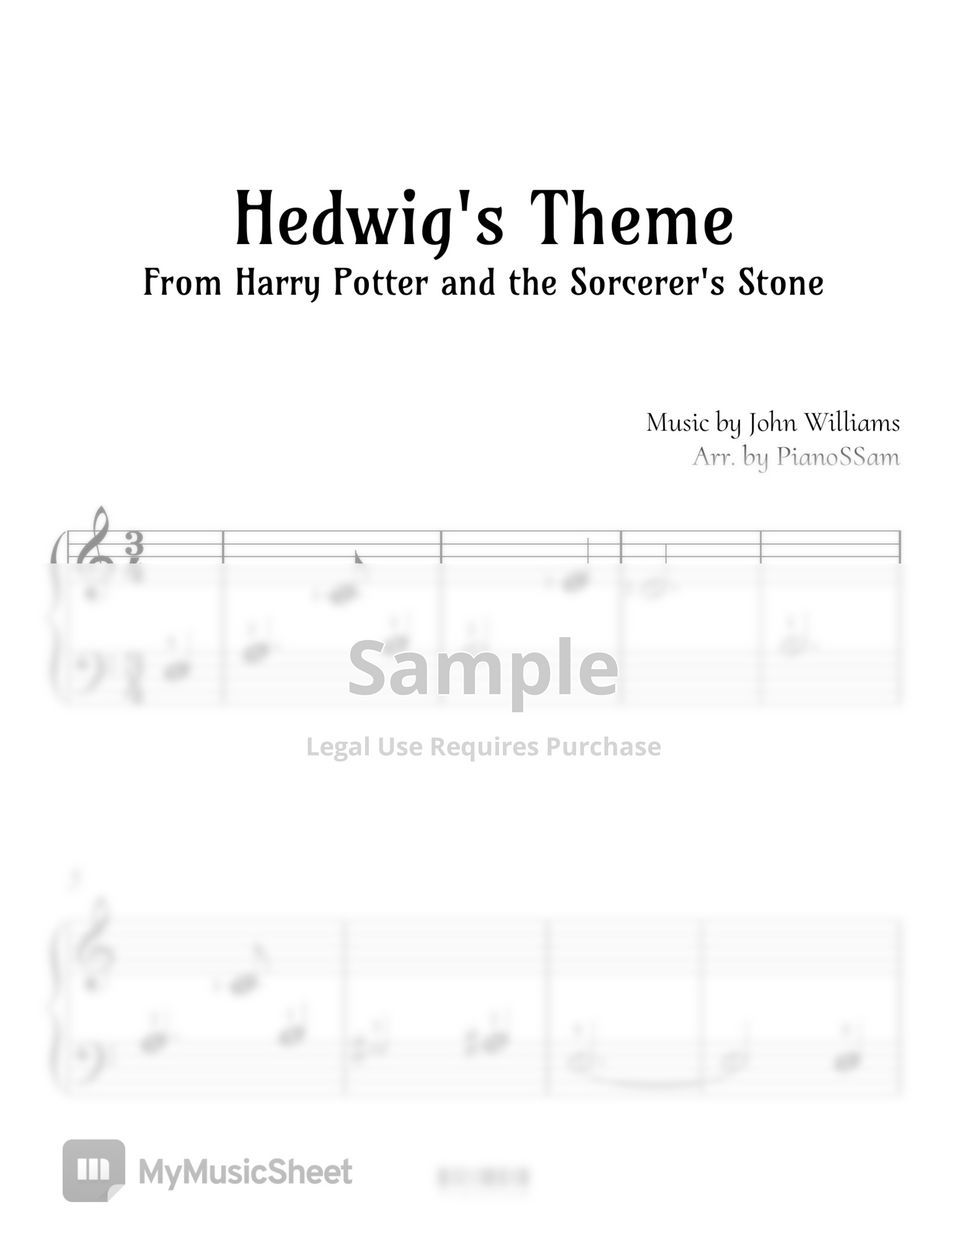 John Williams - [Beginner] Hedwig's Theme (Harry Potter) by PianoSSam